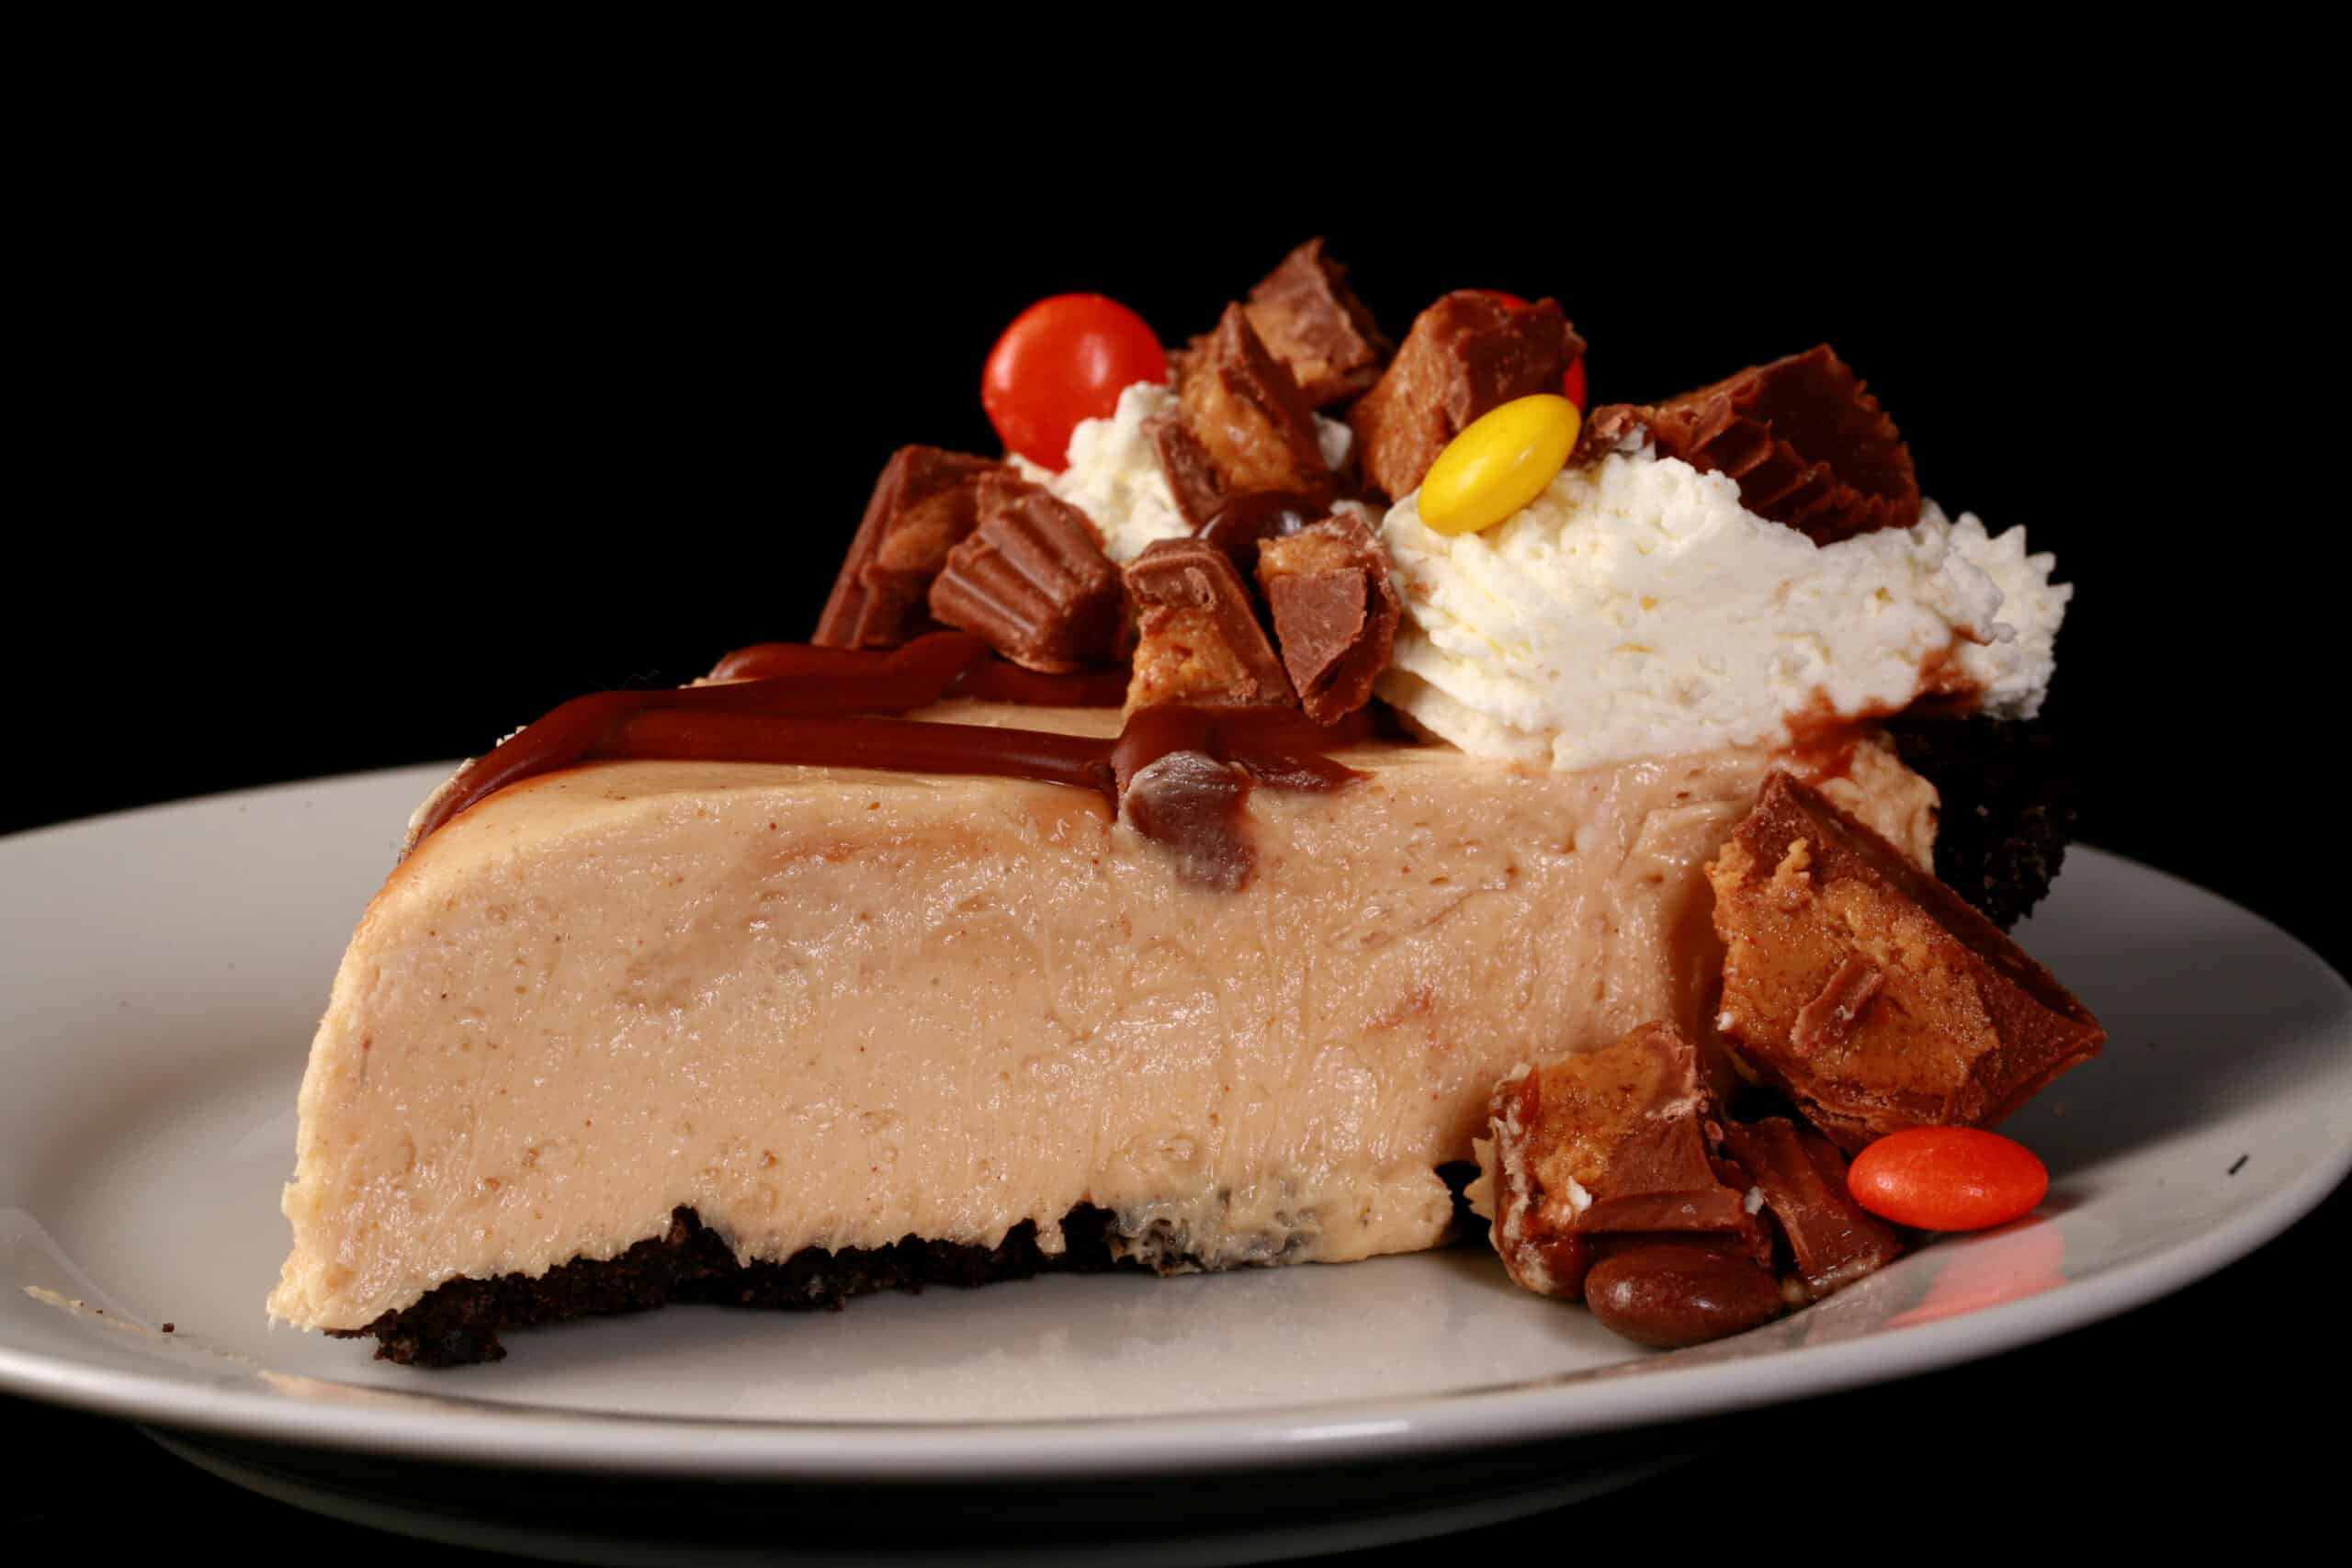 A slice of Reese’s Peanut Butter Pie, with chocolate lattice top,  whipped cream rosettes, chopped peanut butter cups, and Reese’s Pieces.